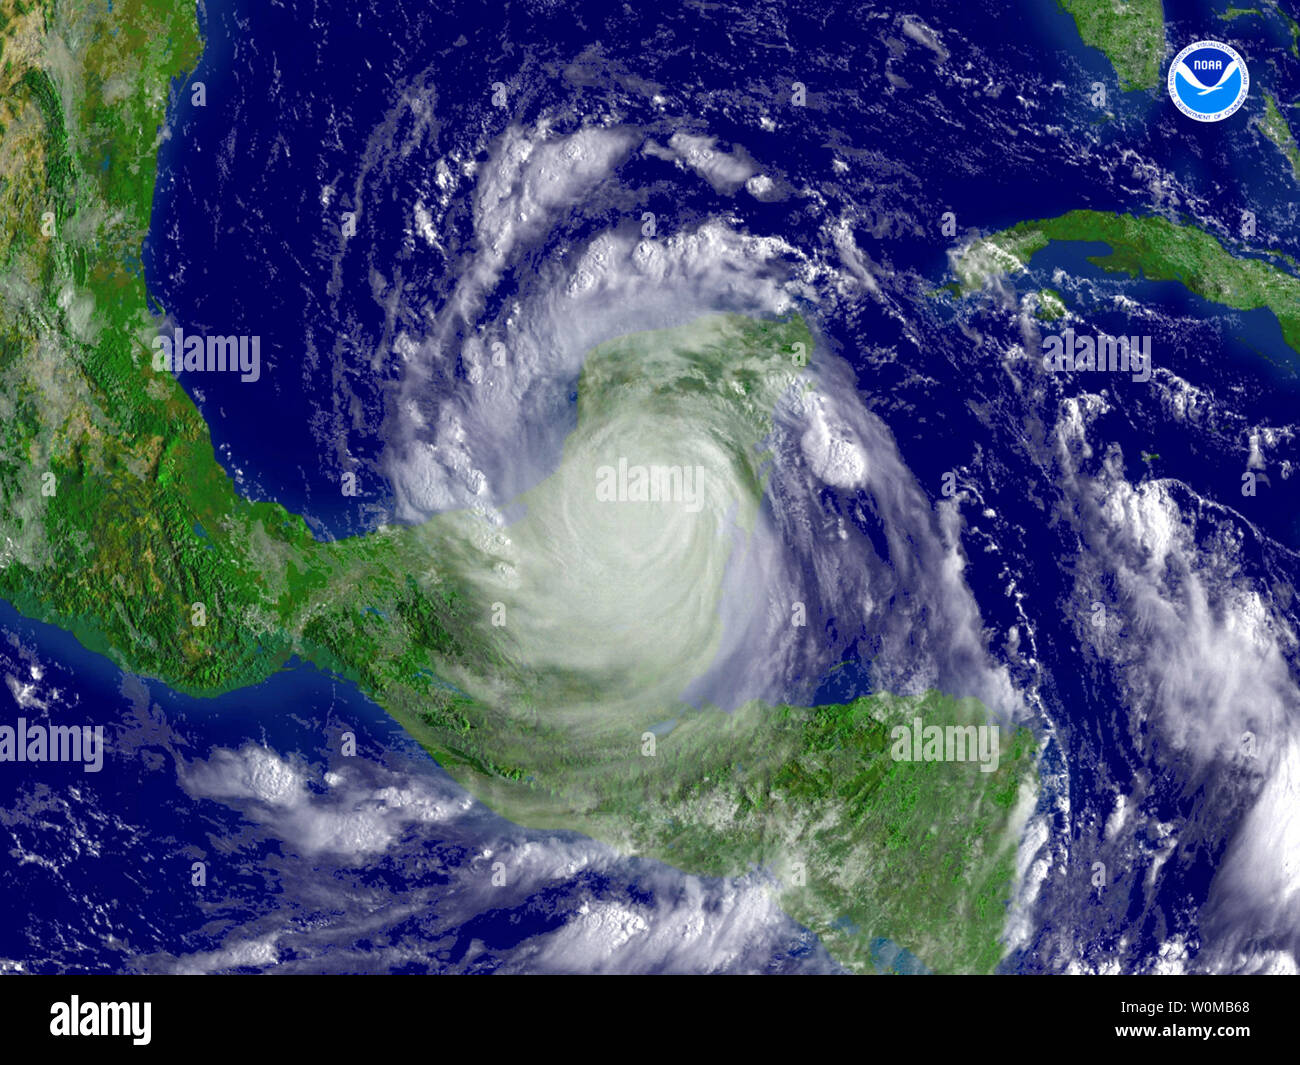 This NOAA satellite image shows Hurricane Dean as it crosses over Mexico's Yucatan peninsula on August 21, 2007. The hurricane, which started as a Category 5 storm over the Caribbean has weakened to a Category 2 after making landfall. (UPI Photo/NOAA) Stock Photo